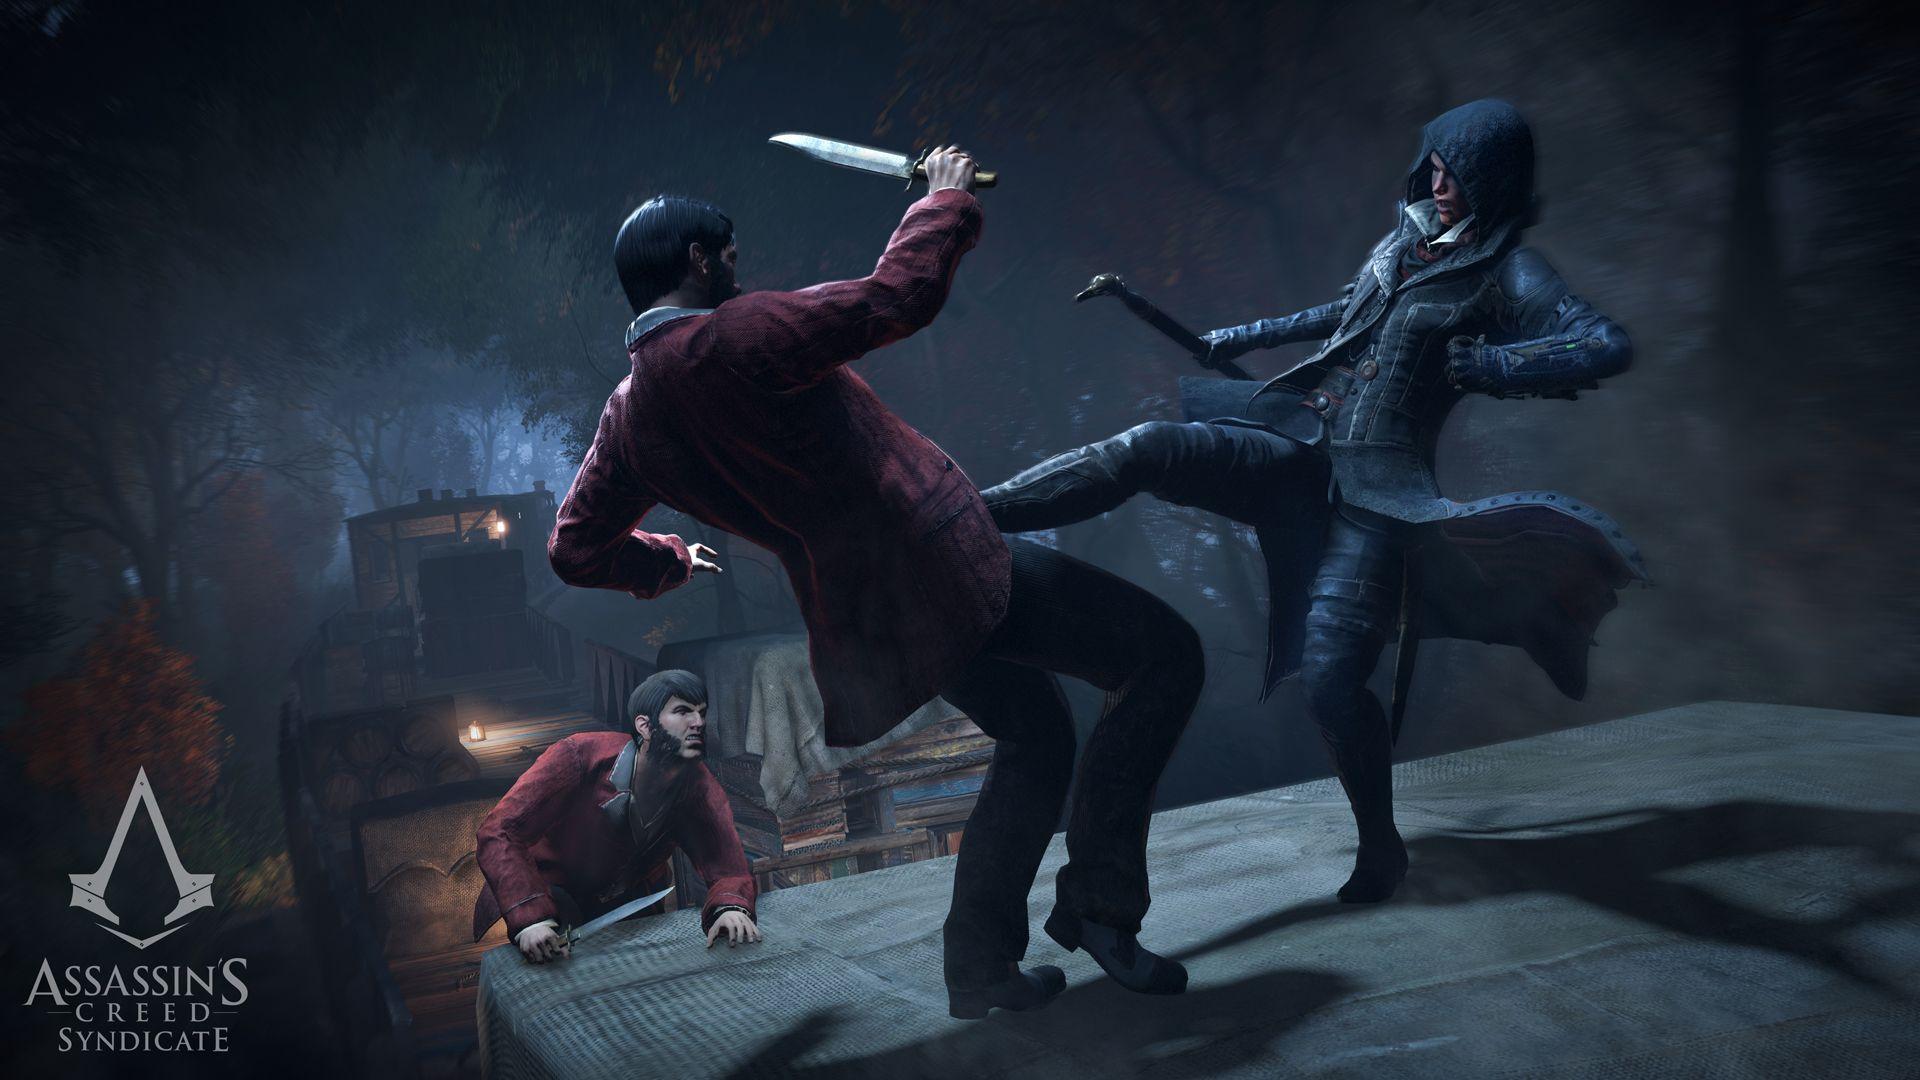 Picture Of Assassin's Creed: Syndicate On With Evie Frye 1 5